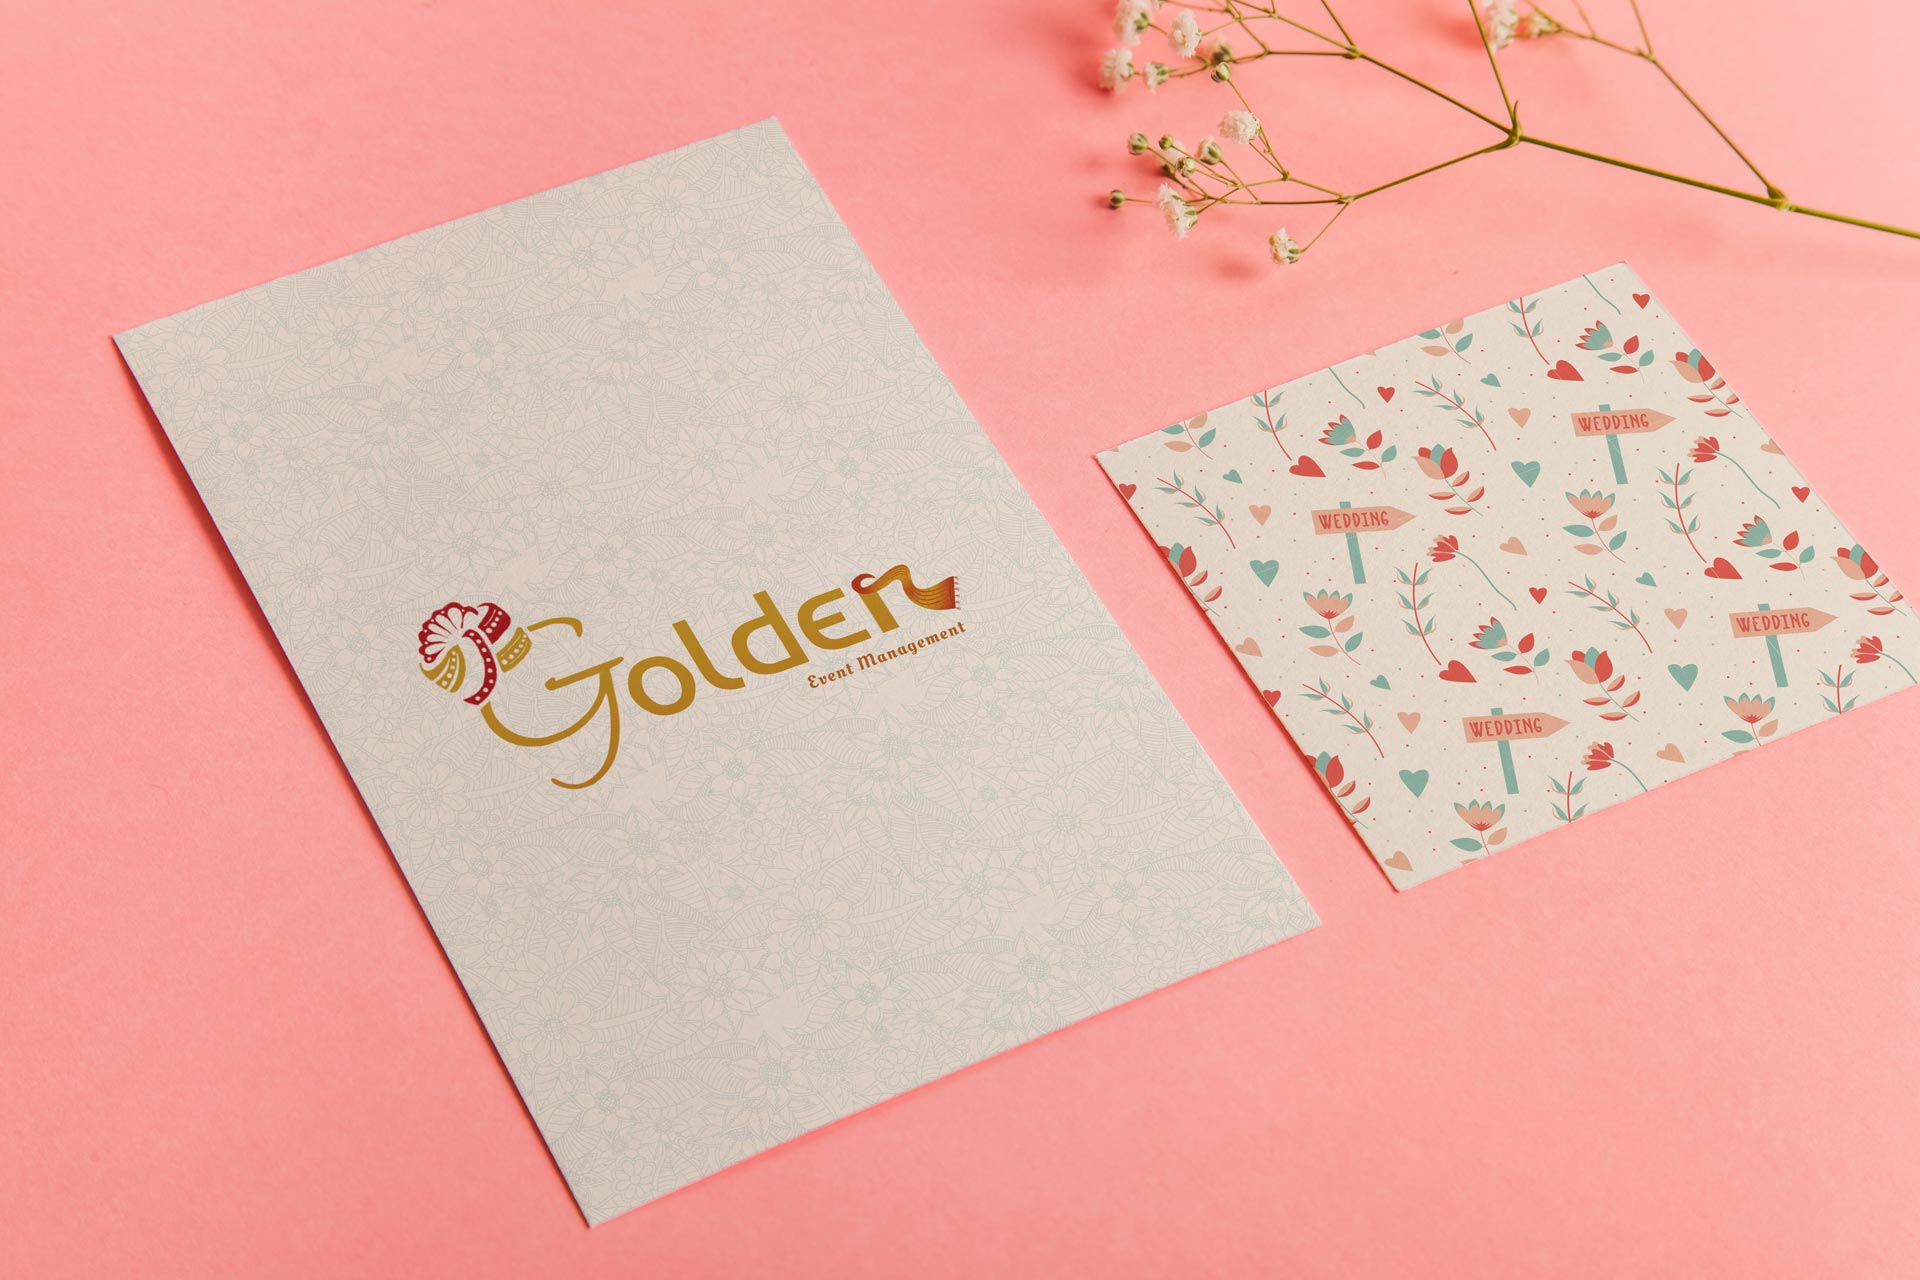 Golden Event Management is the Best event management firm in Gorakhpur. This logo is made with love by CodesGesture, Website Designing company in Gorakhpur